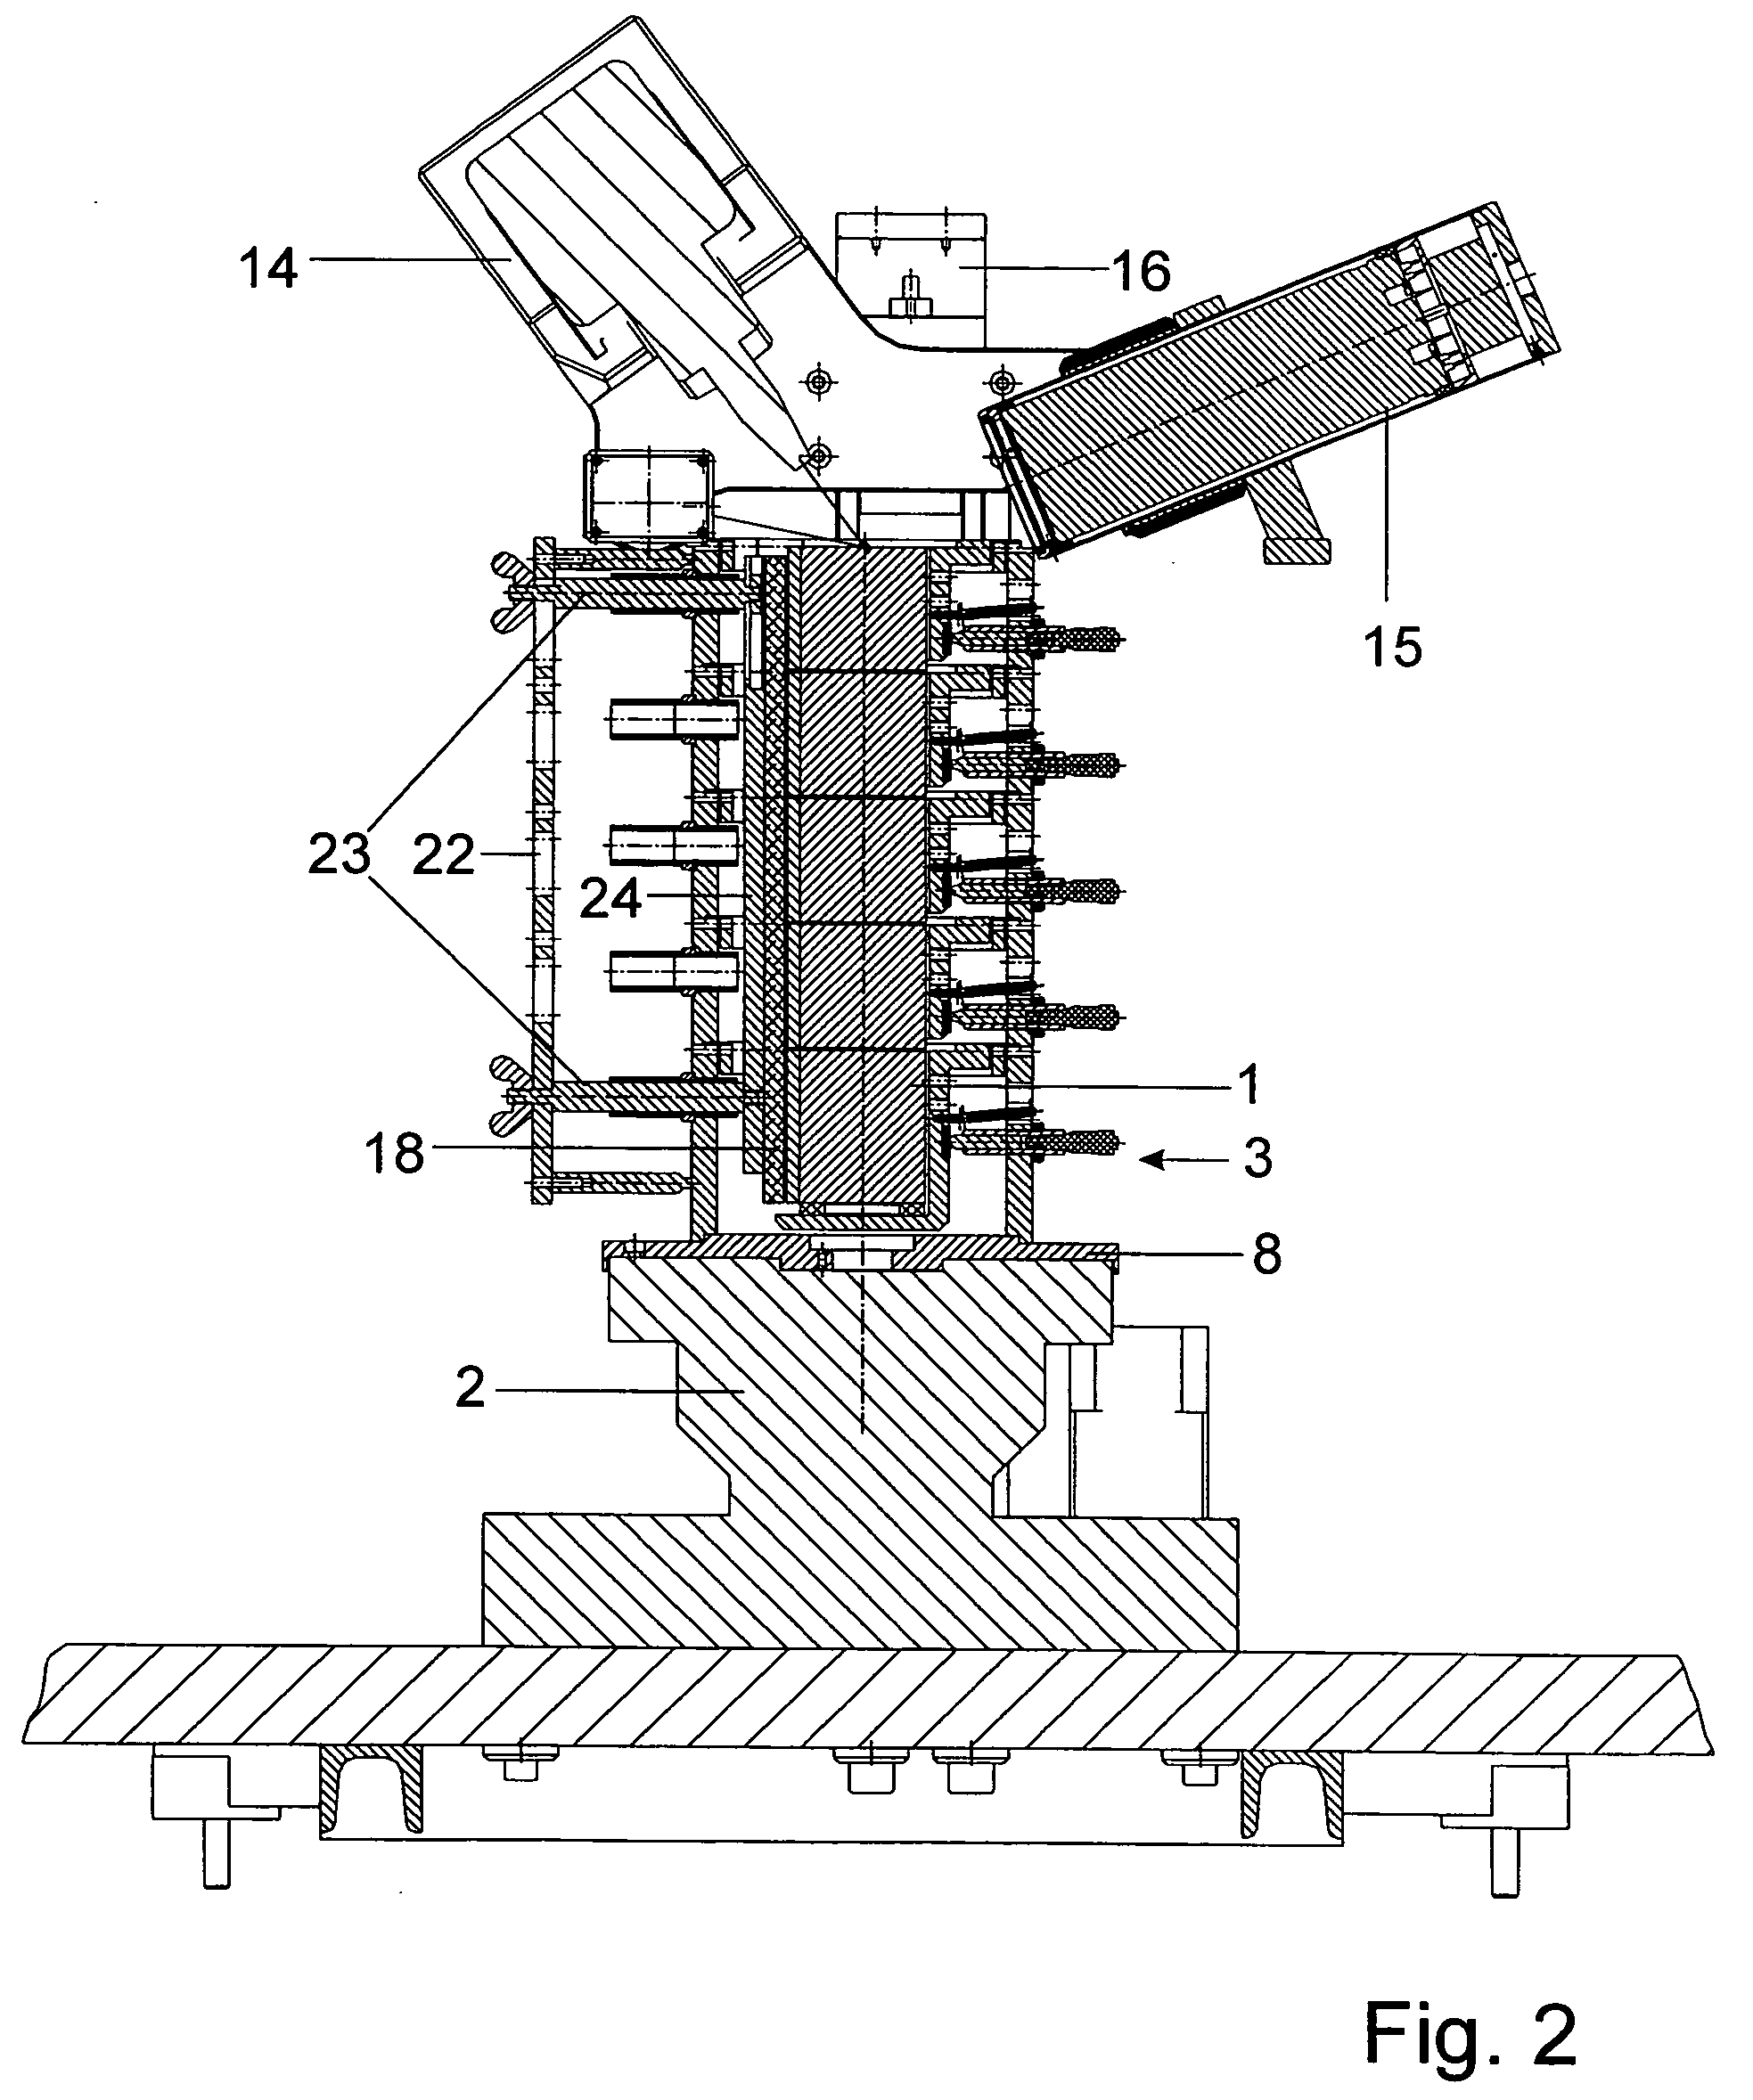 Method and apparatus for the measurement, orientation and fixation of at least one single crystal